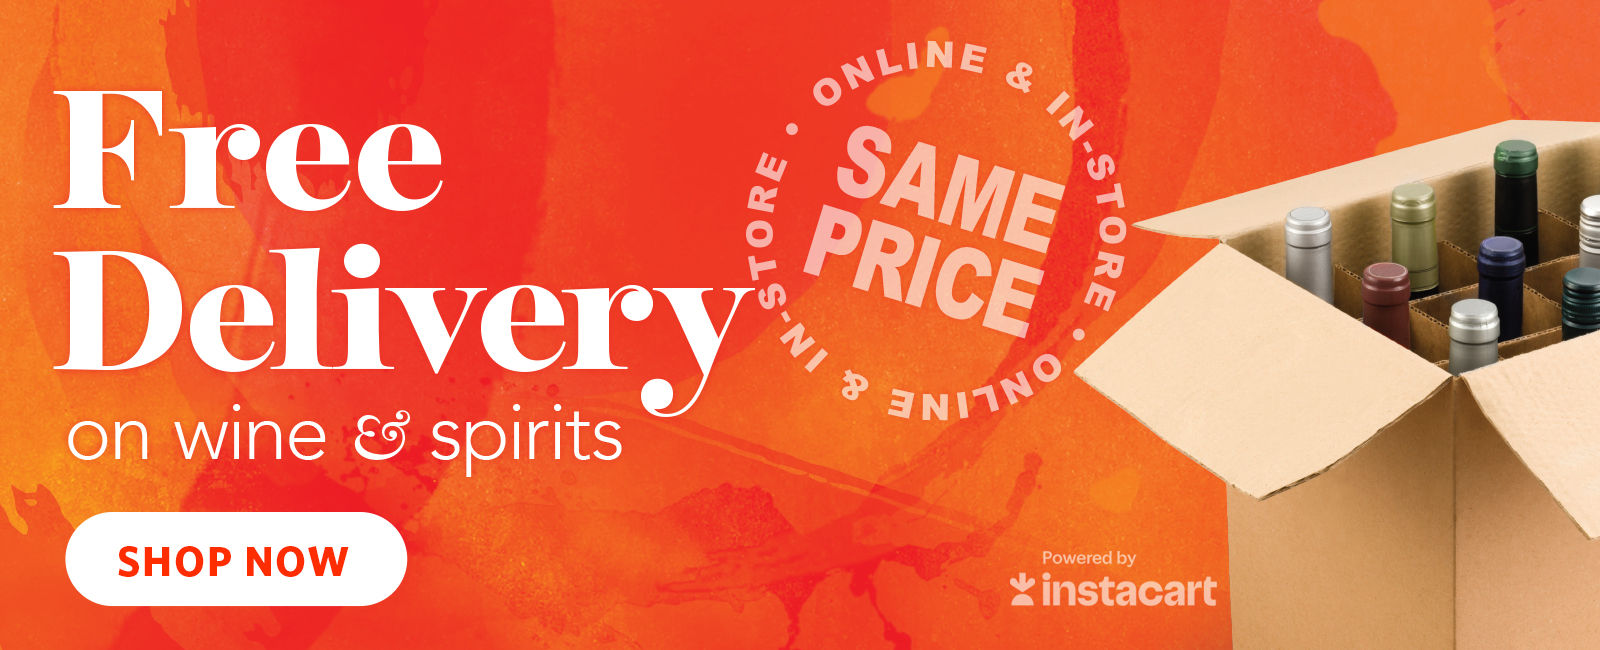 Free Delivery on Wine & Spirits - SHOP NOW